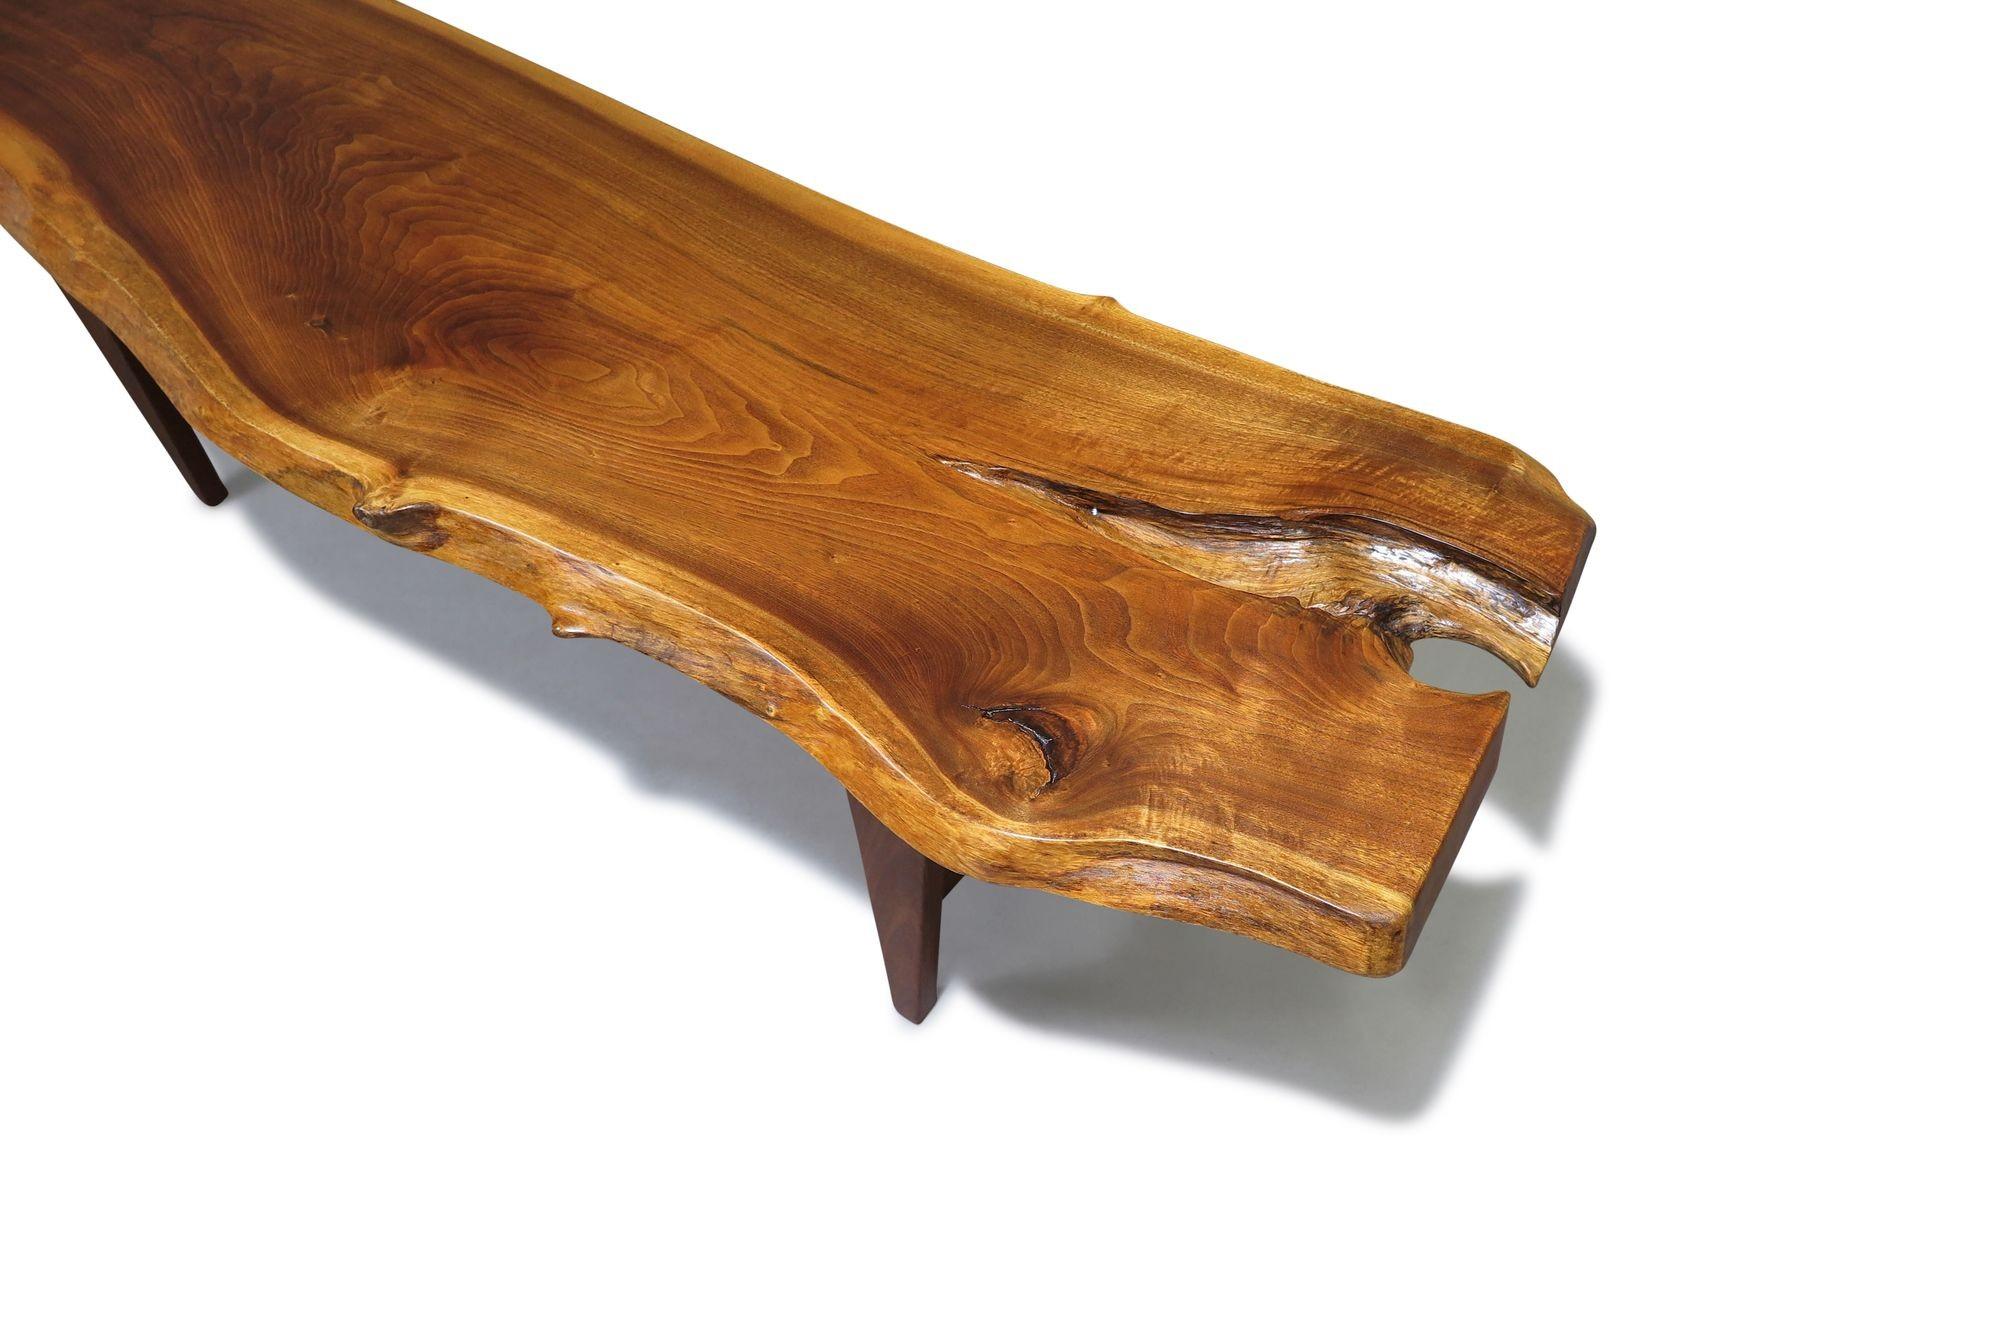 Mid Century live edge bench or coffee table is crafted of a solid walnut slab raised tapered wood legs.Can be used as a bench or a coffee table. Restored in a natural oil finish. Excellent condition.
Measurements
W 68'' x D 19'' x H 18.75''